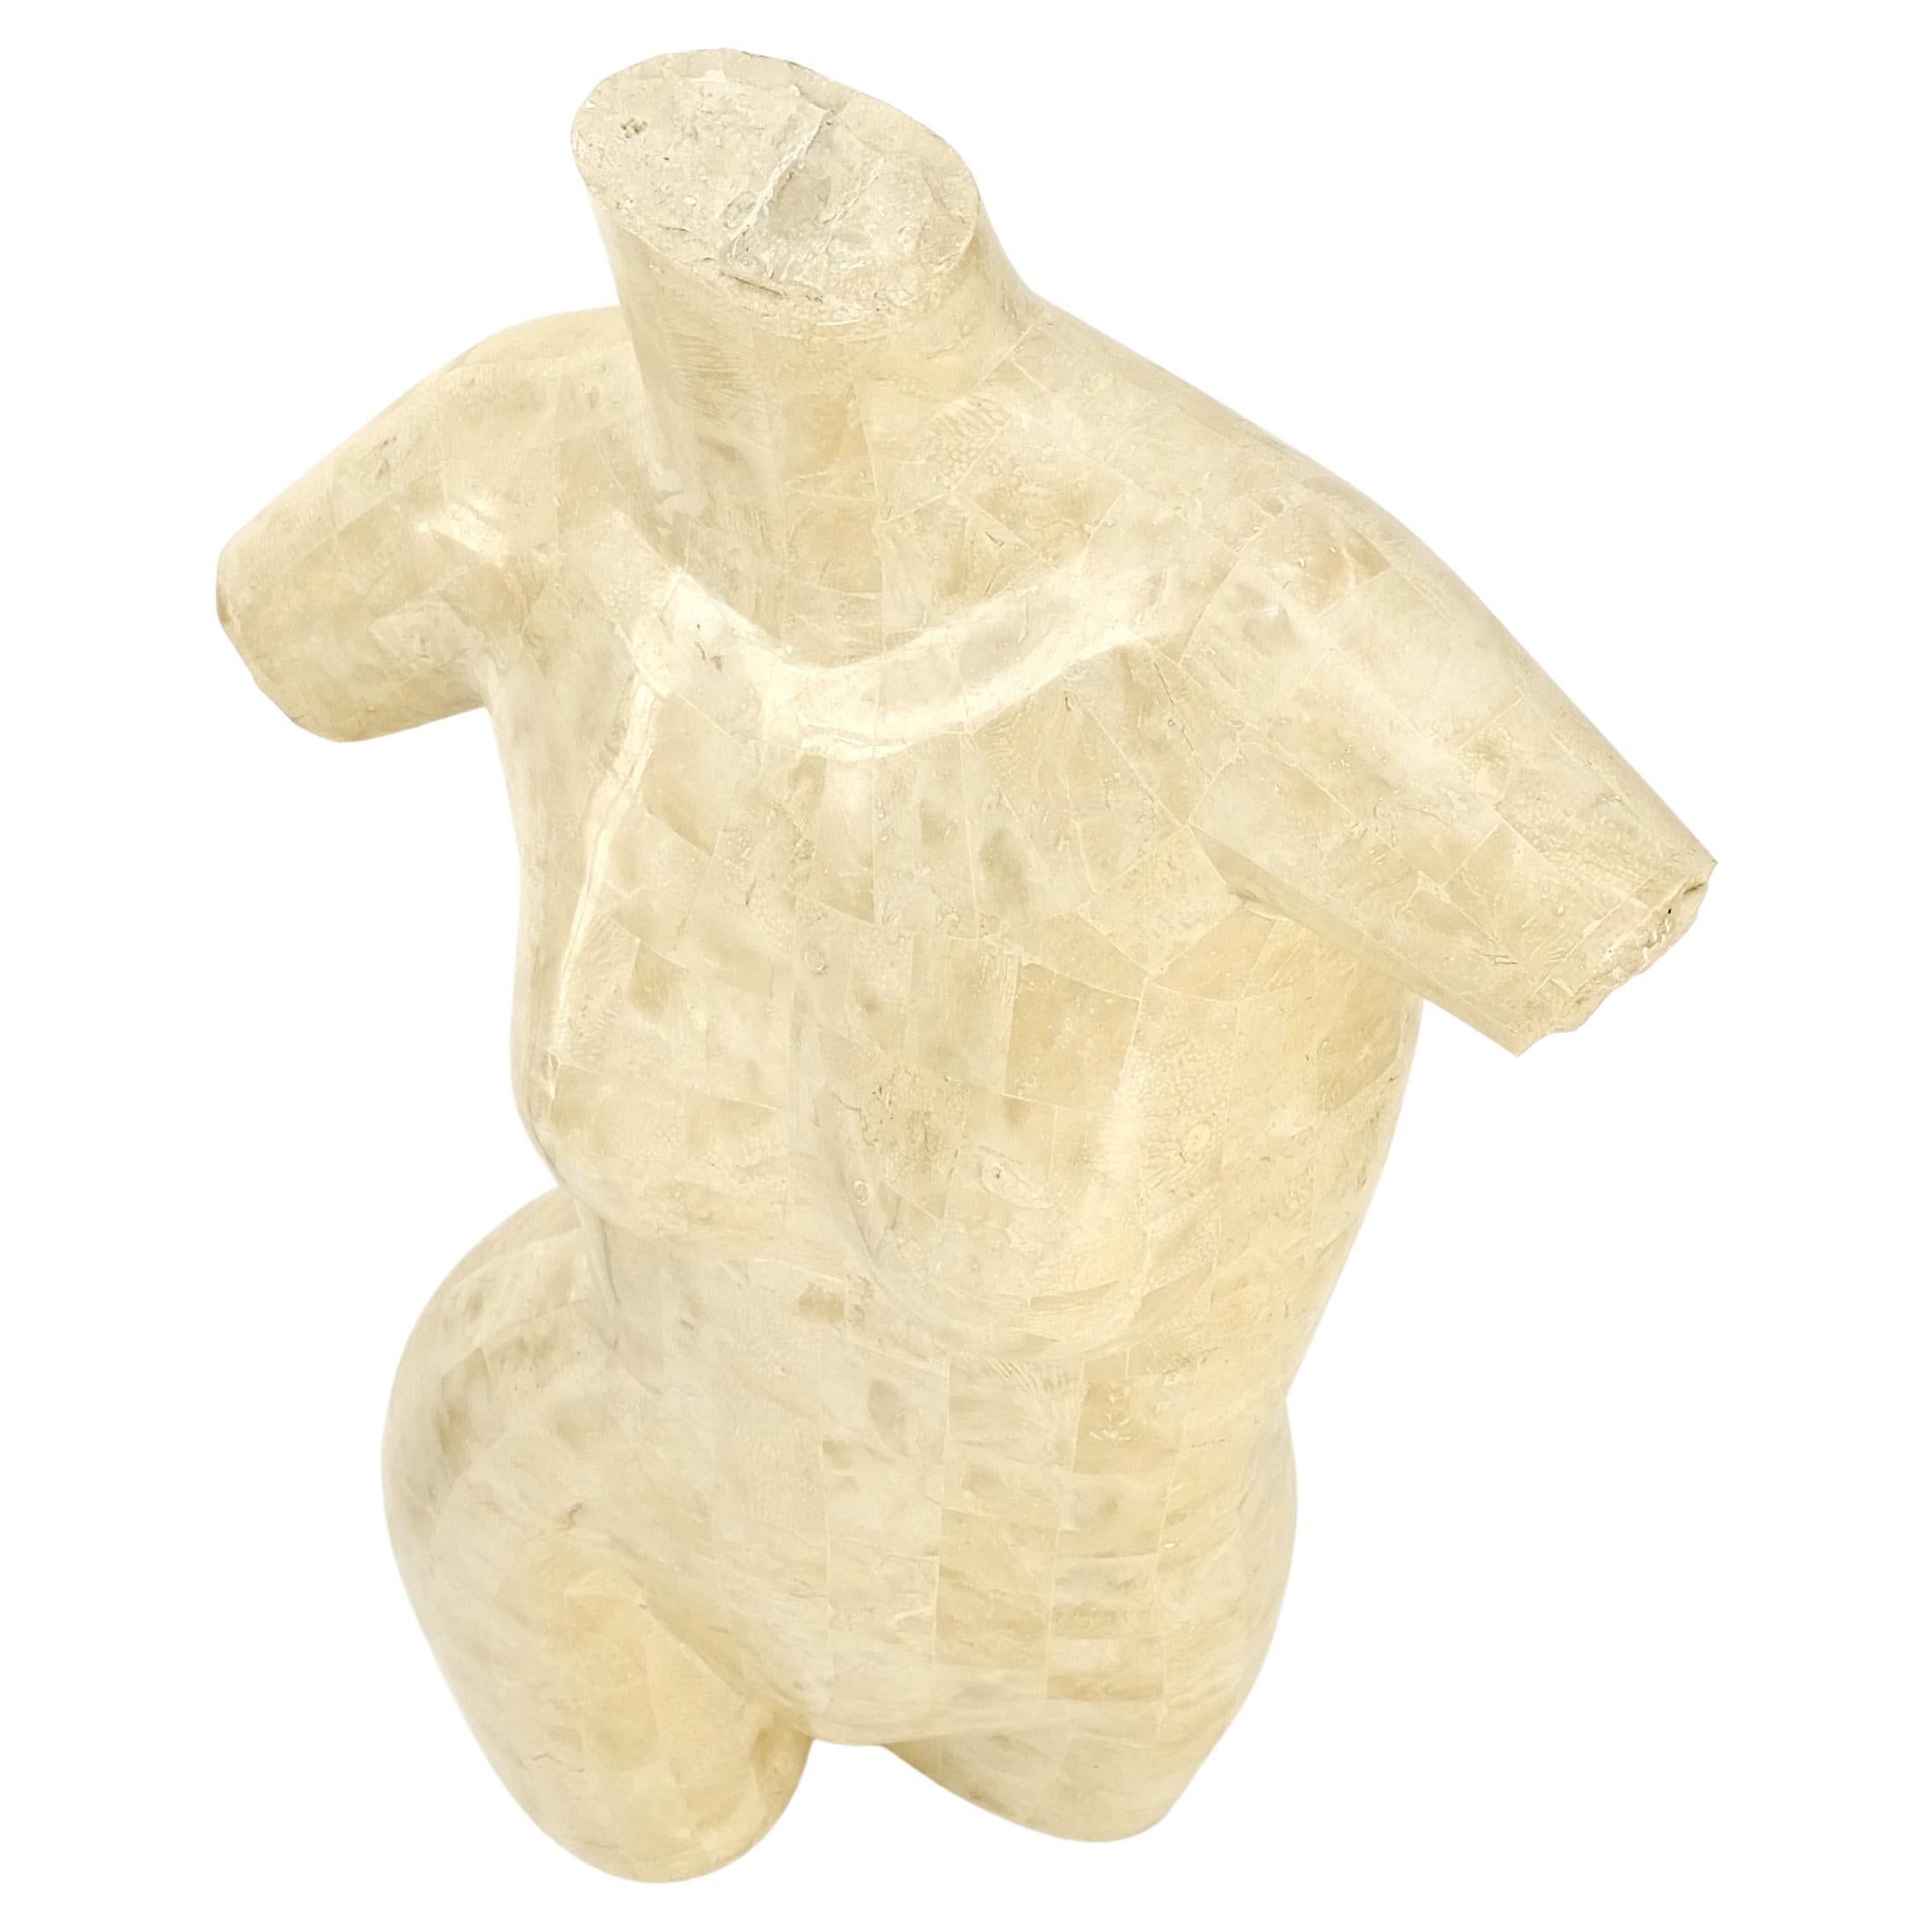 Tessellated Stone Marble Travertine Sculpture of Nude Female Torso Mint! For Sale 5